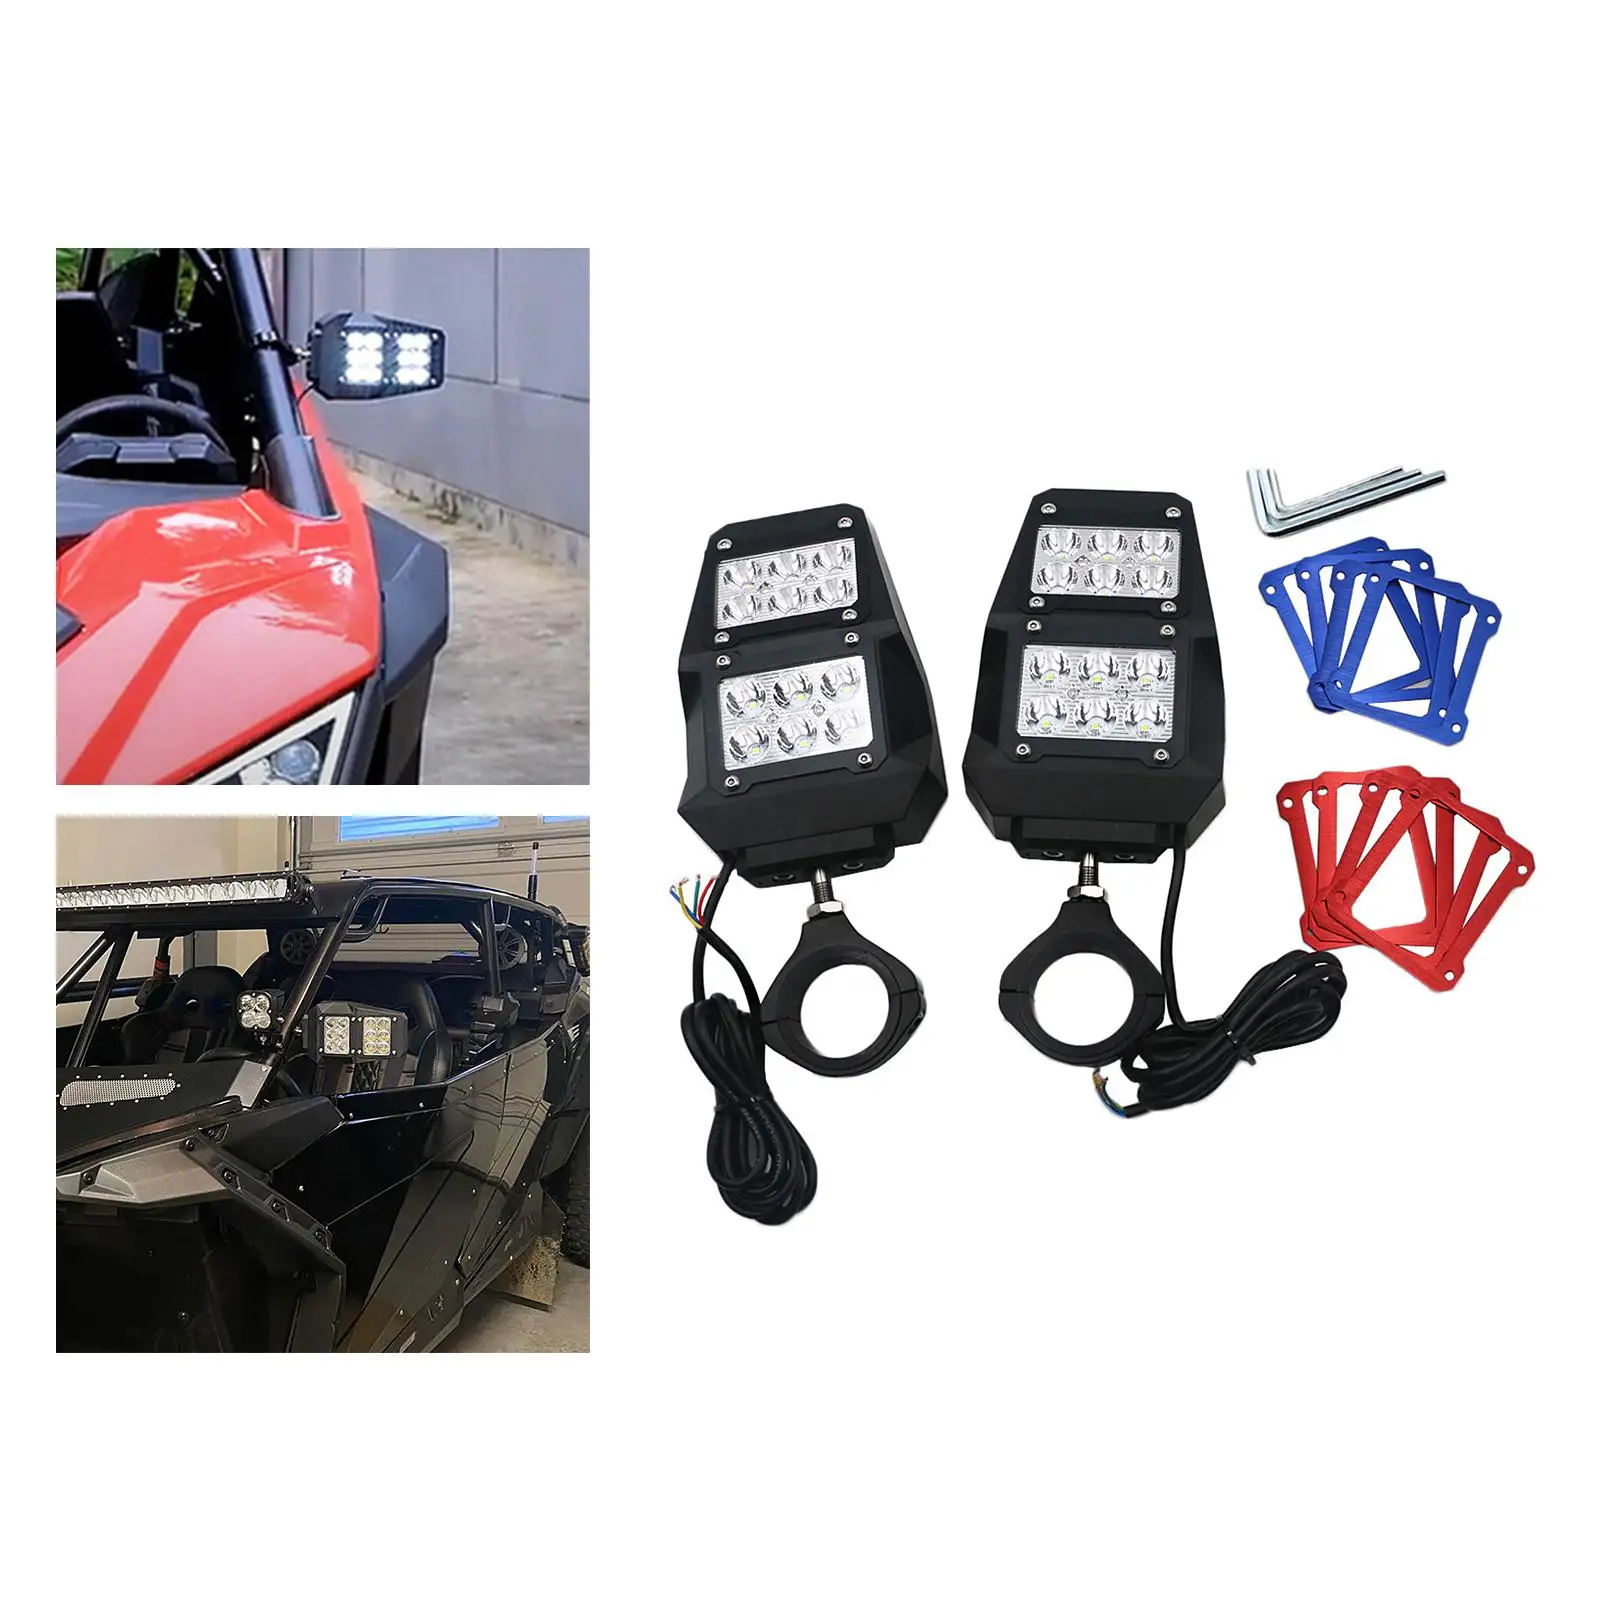 Unique All Topography Vehicle UTV/ATV Mirror with Light with Three Color Rear Frame UTV Rear View Mirrors for Auto Accessories